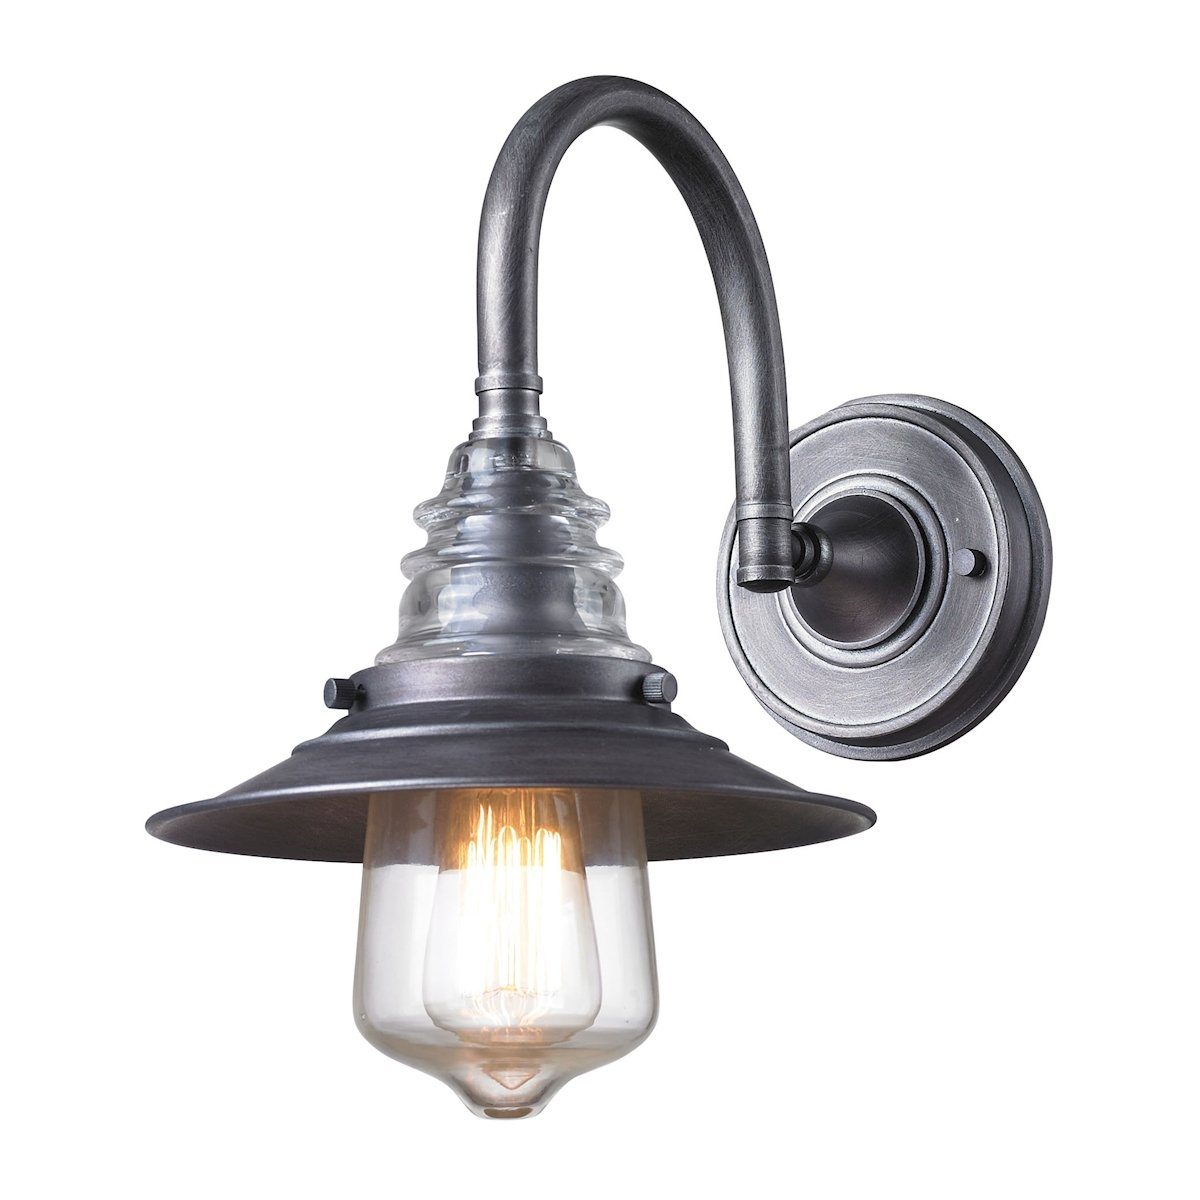 Insulator Glass 1 Light Wall Sconce In Weathered Zinc Wall Sconce Elk Lighting 